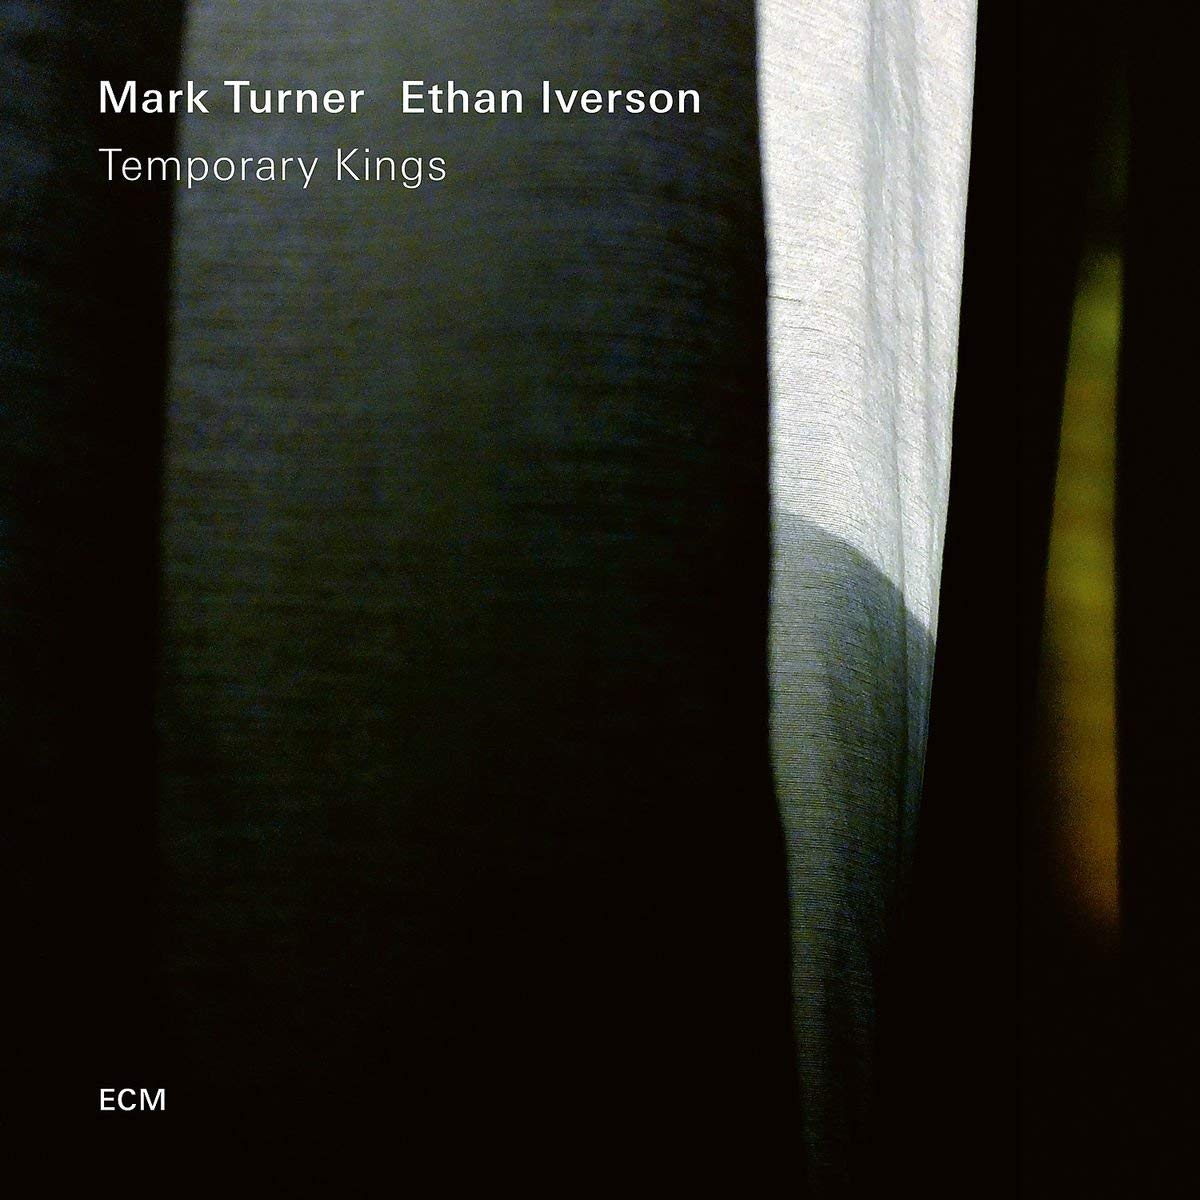 Temporary Kings | Mark Turner, Ethan Iverson image5